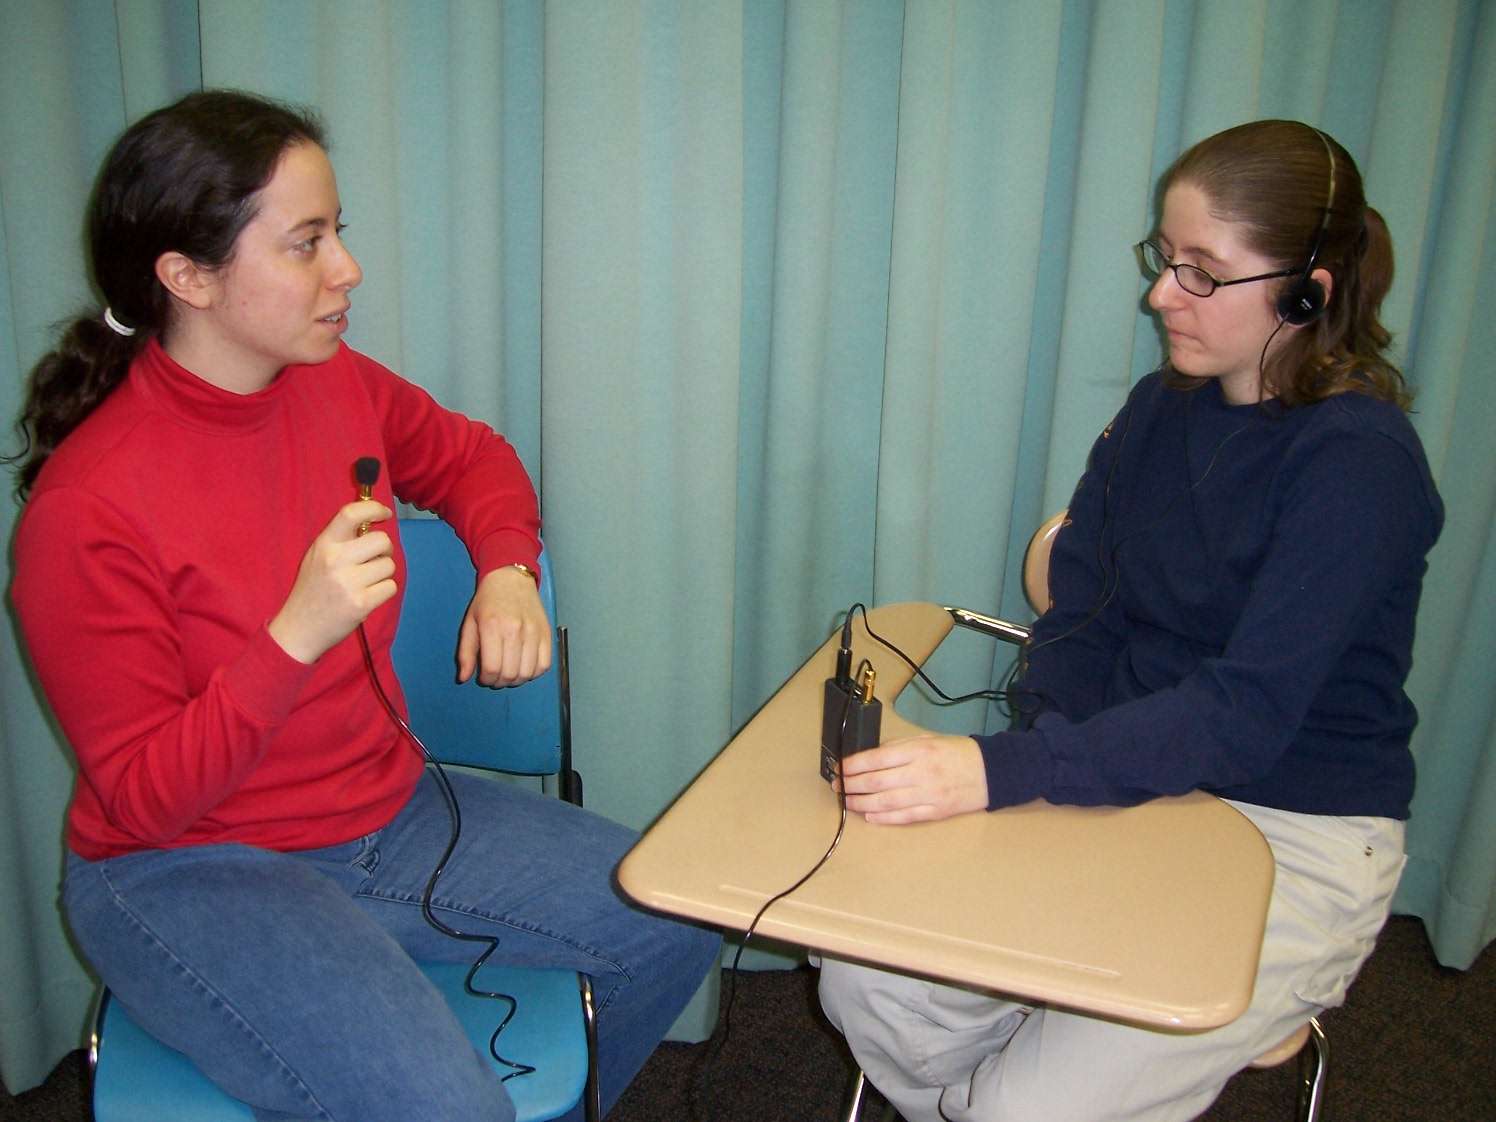 Photo of two women talking using an ALD -- one speaking into a microphone, and one wearing a headset.